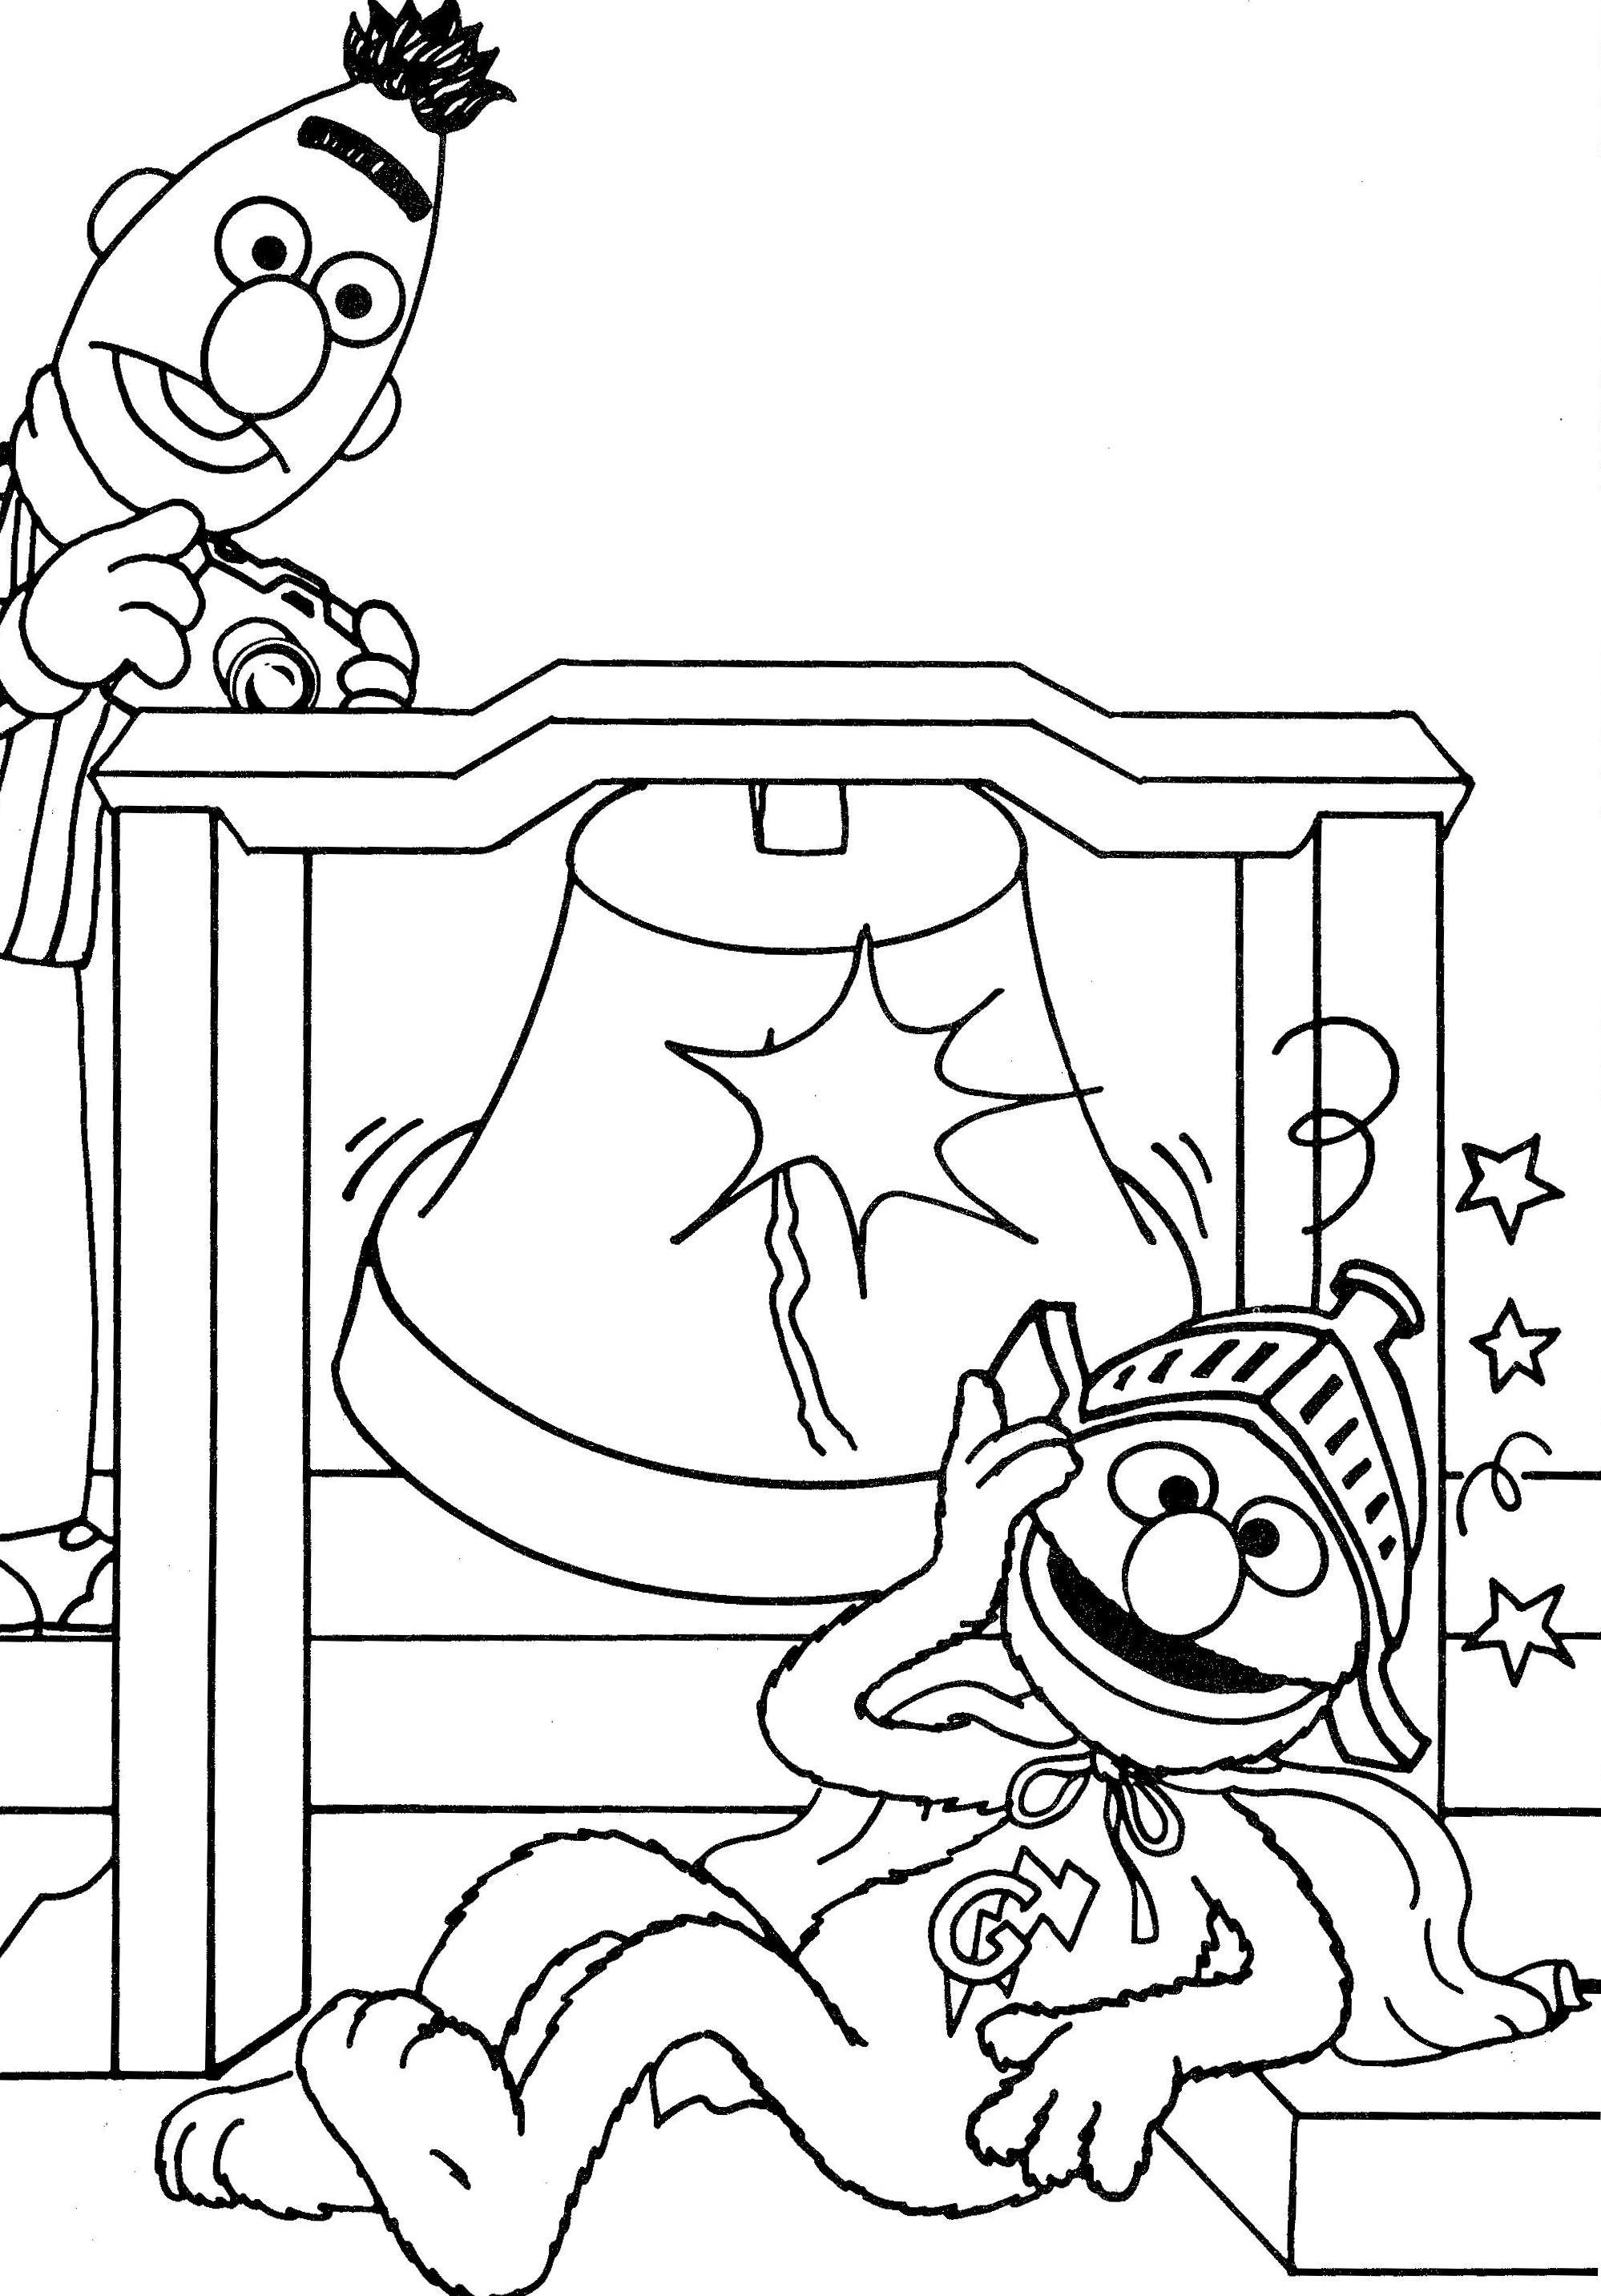 Liberty Bell Coloring Page Printable - Coloring Home